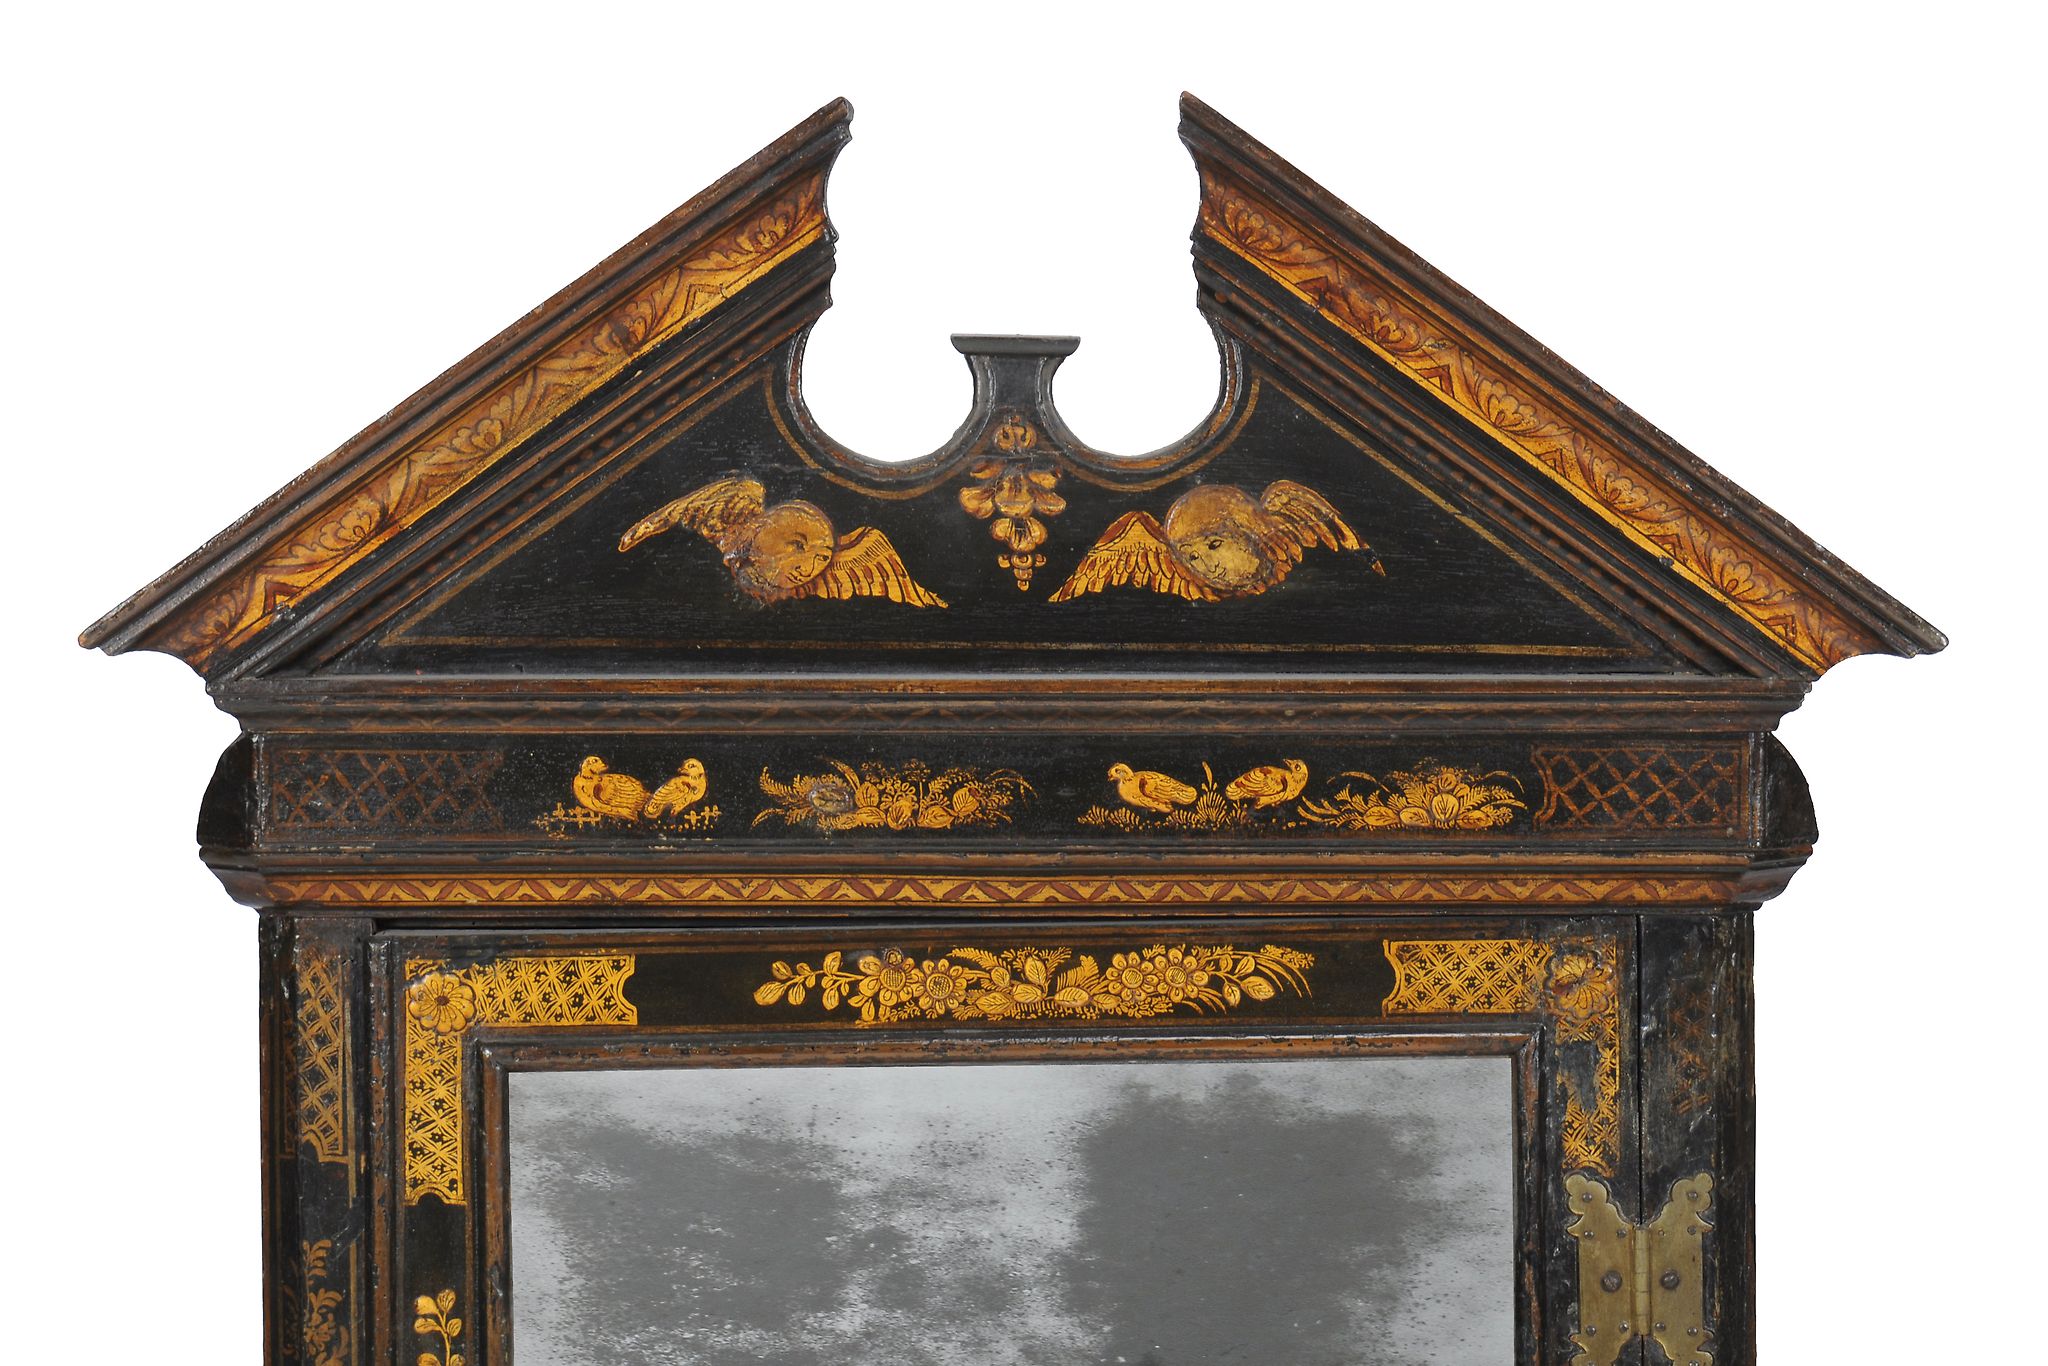 A George I black lacquer and gilt decorated hanging corner cabinet, circa 1720, in the manner of - Image 2 of 3